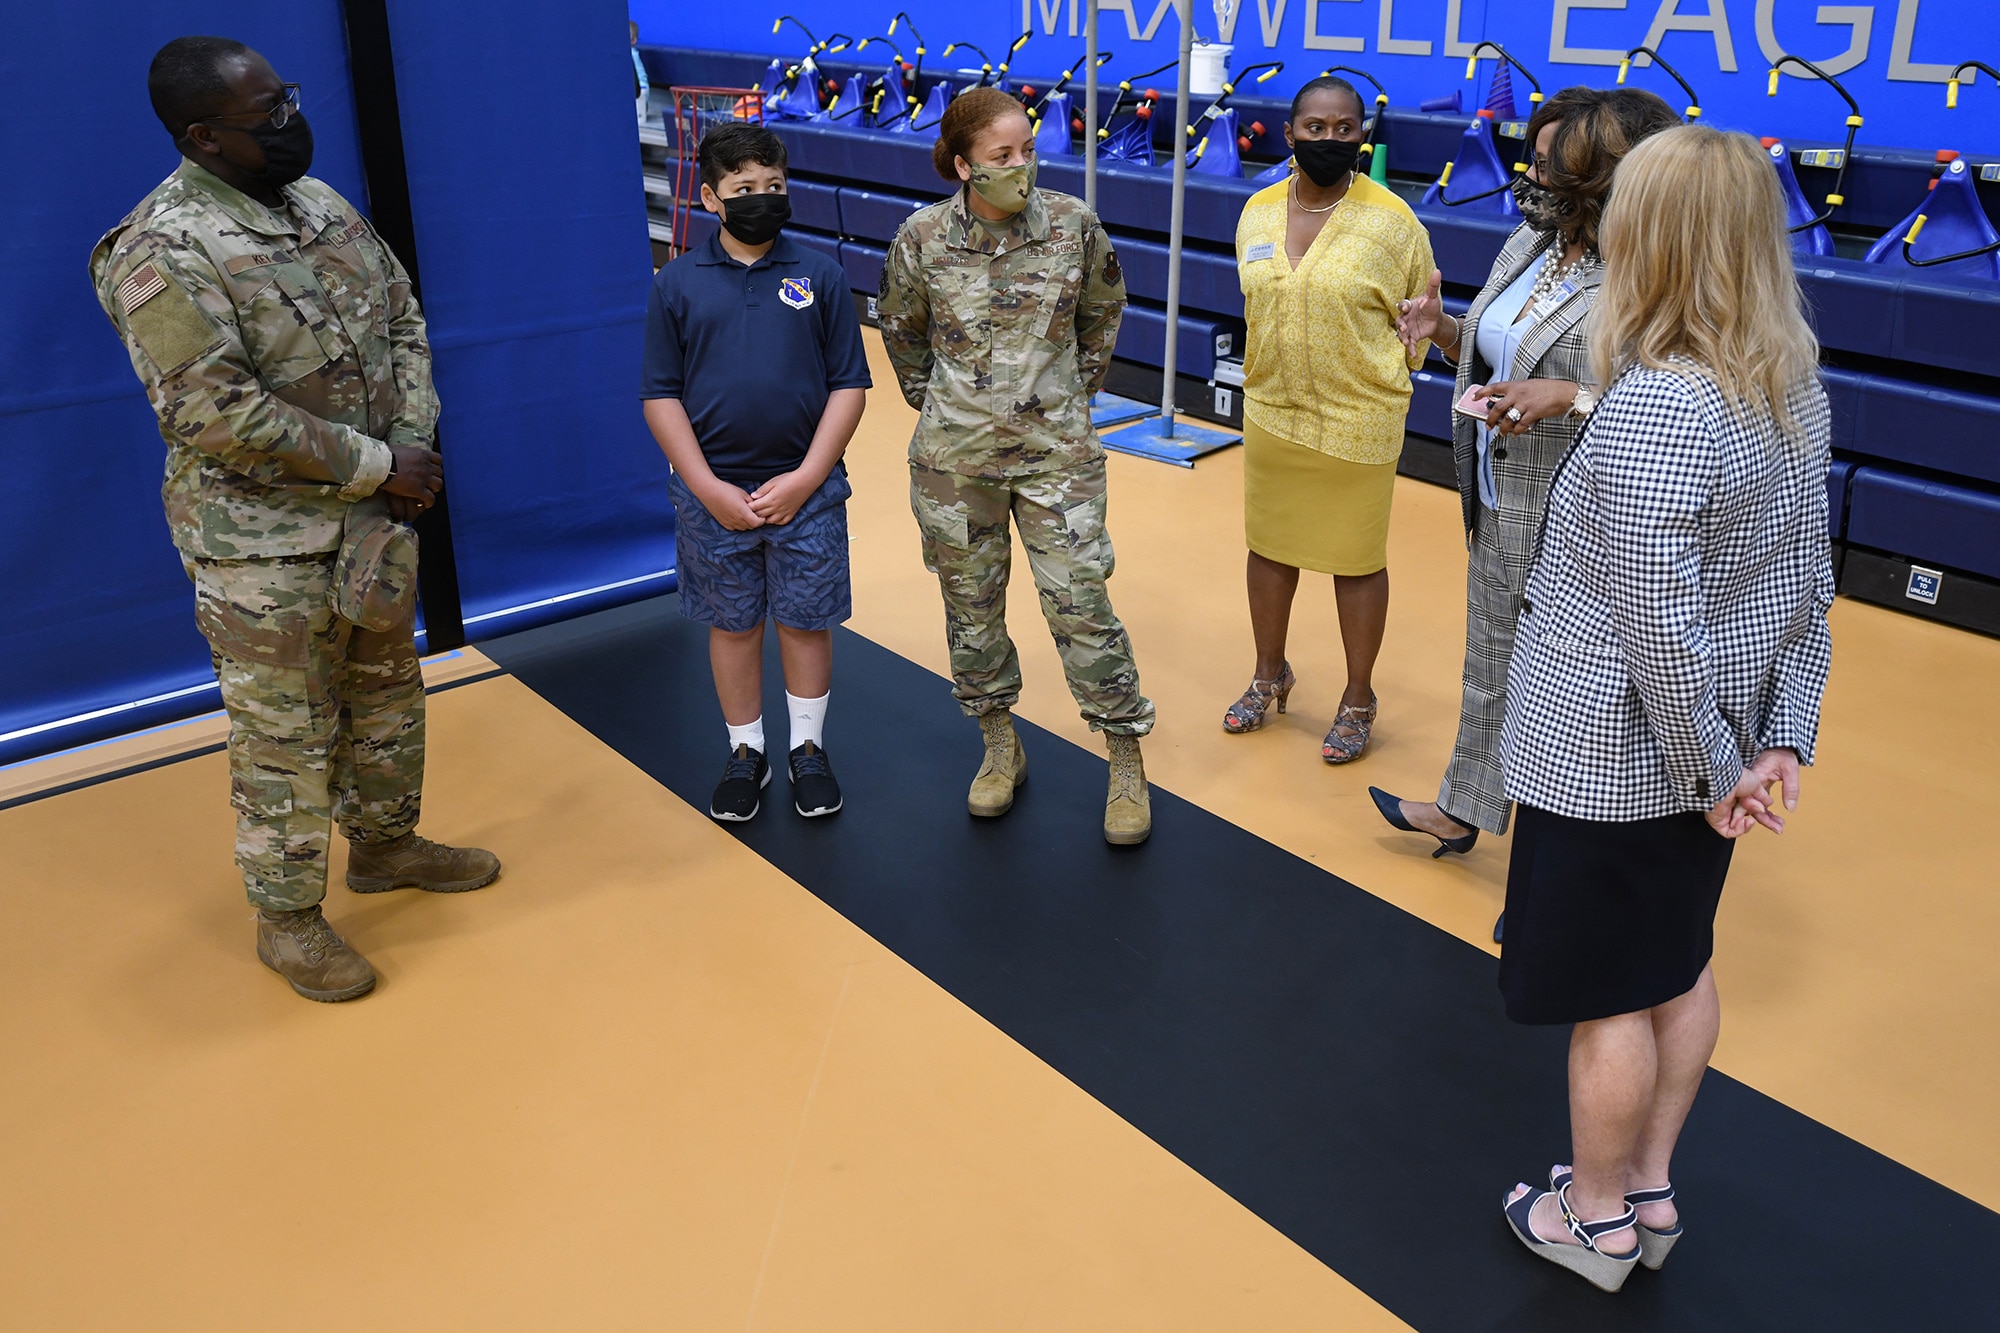 Col. Eries Mentzer, 42nd Air Base Wing Commander, attends a tour of Maxwell Elementary and Middle School, April 27, 2021. The school provides educational opportunities to residents of Hunt Military Communities Housing and Maxwell Air Force Base FamCamp.